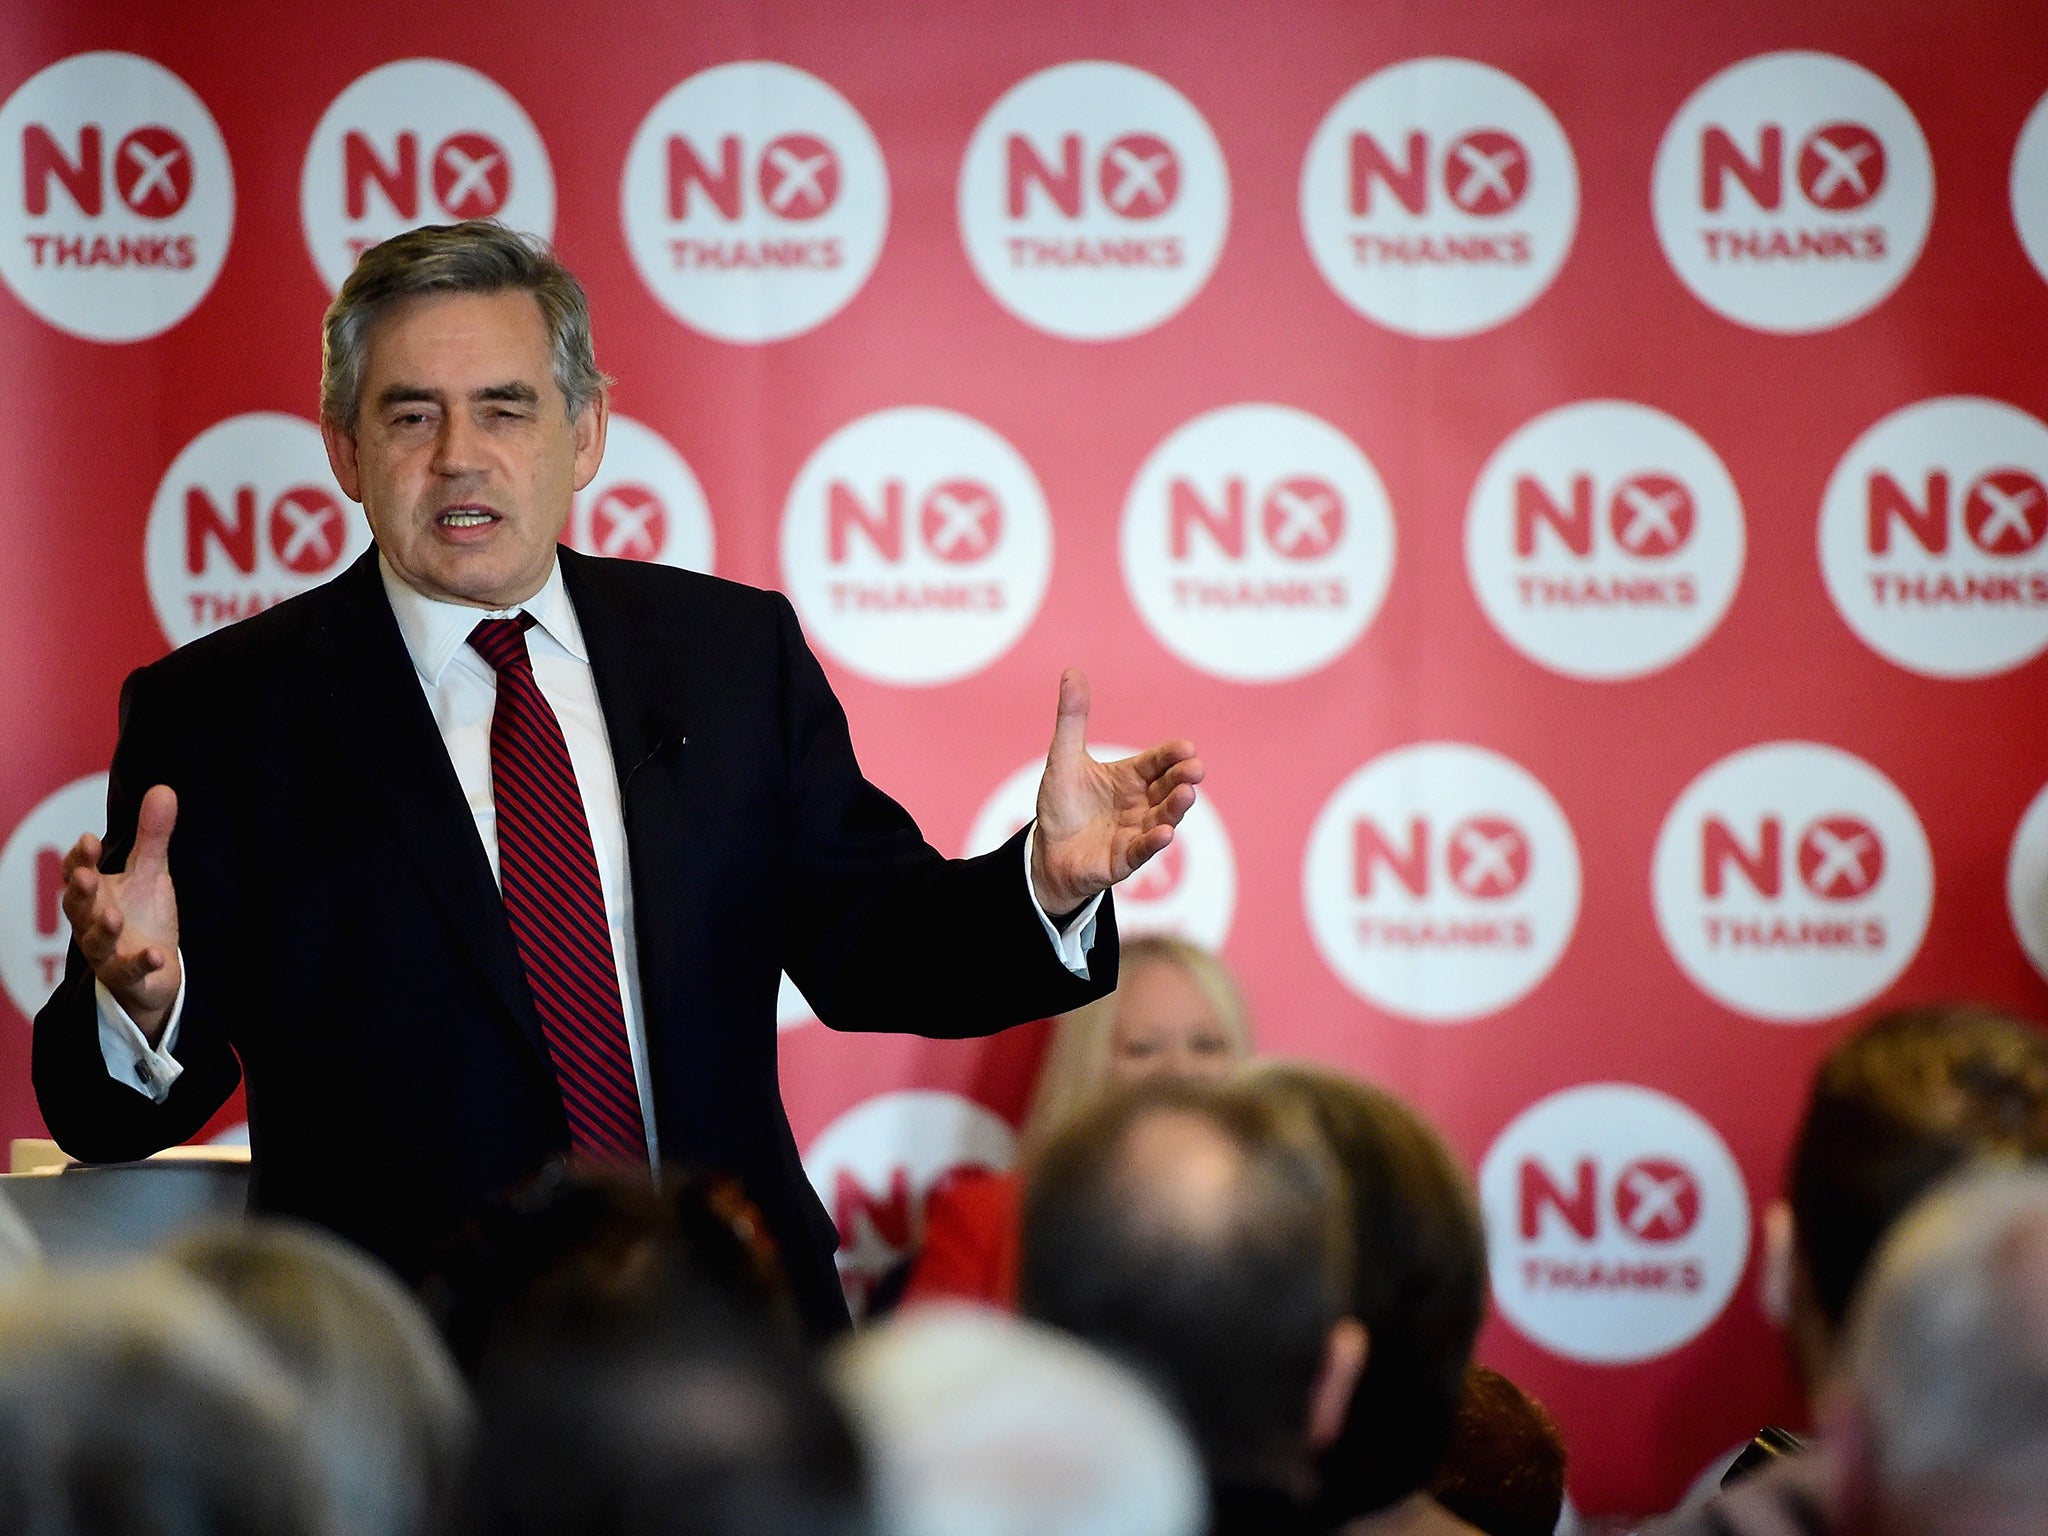 Former Labour Prime Minister Gordon Brown makes the case for Scotland staying in the UK